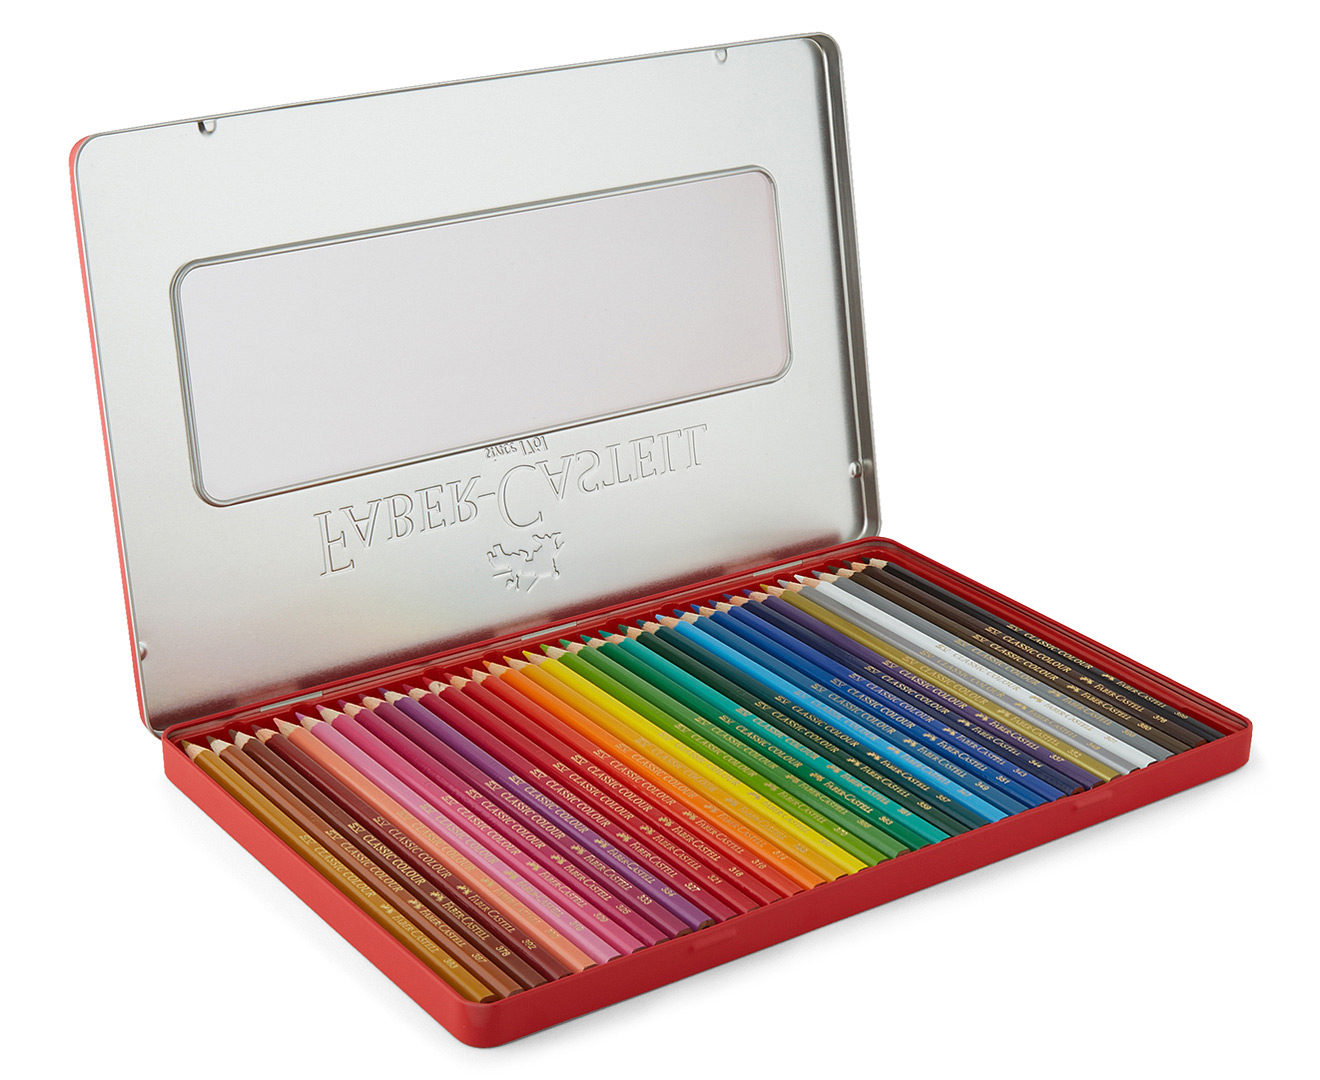 Faber-Castell 36 Classic Colour Pencils Gift Tin